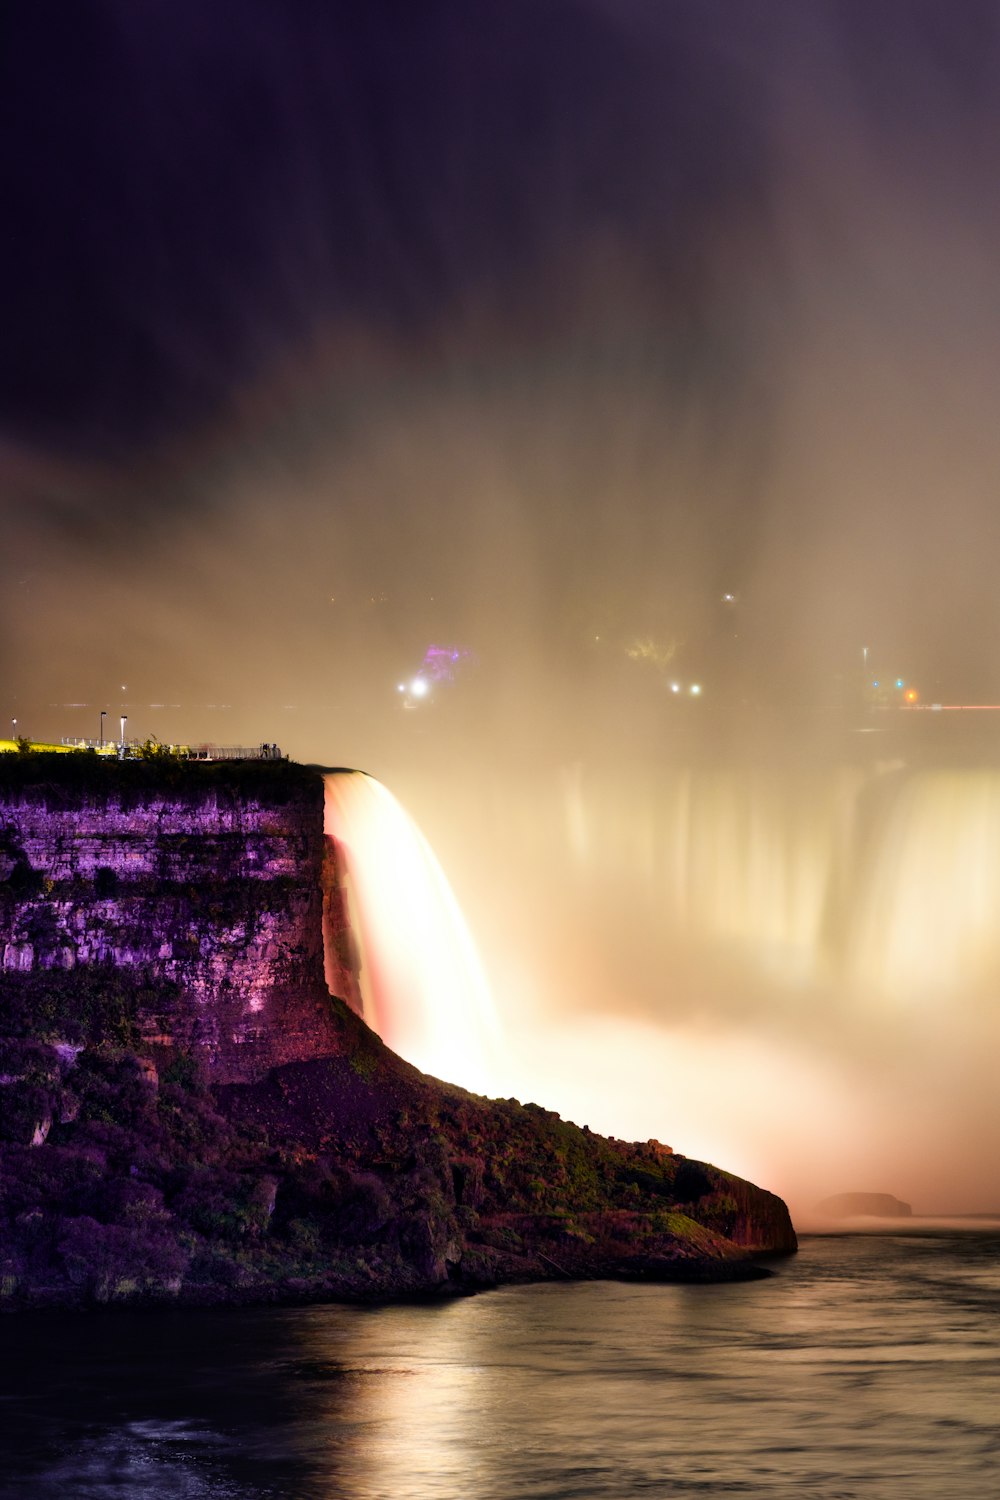 niagara falls at night with the lights on